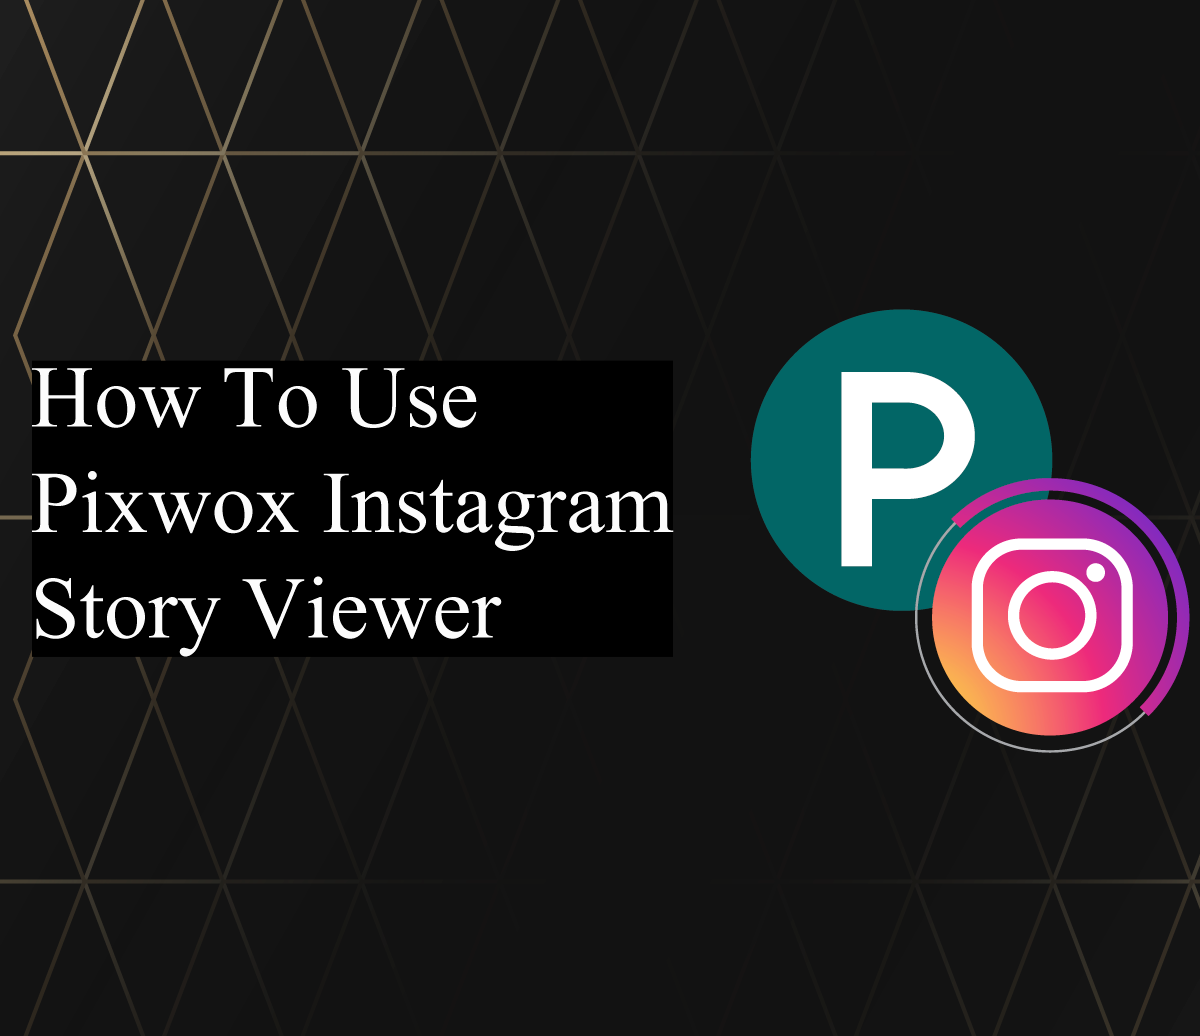 How To Use Pixwox Instagram Story Viewer